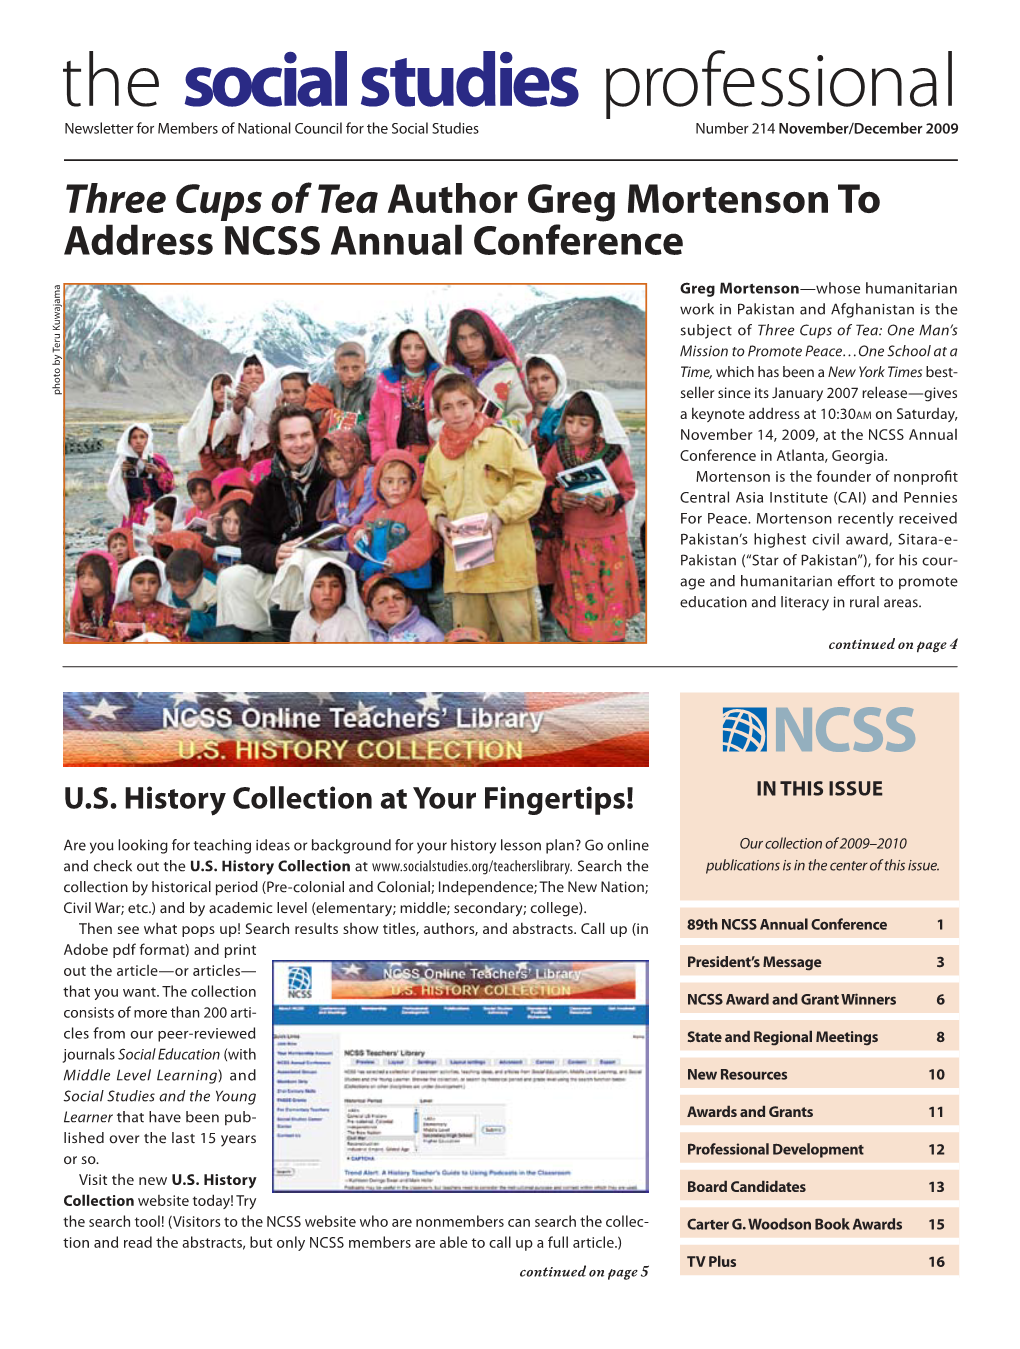 Three Cups of Tea Author Greg Mortenson to Address NCSS Annual Conference